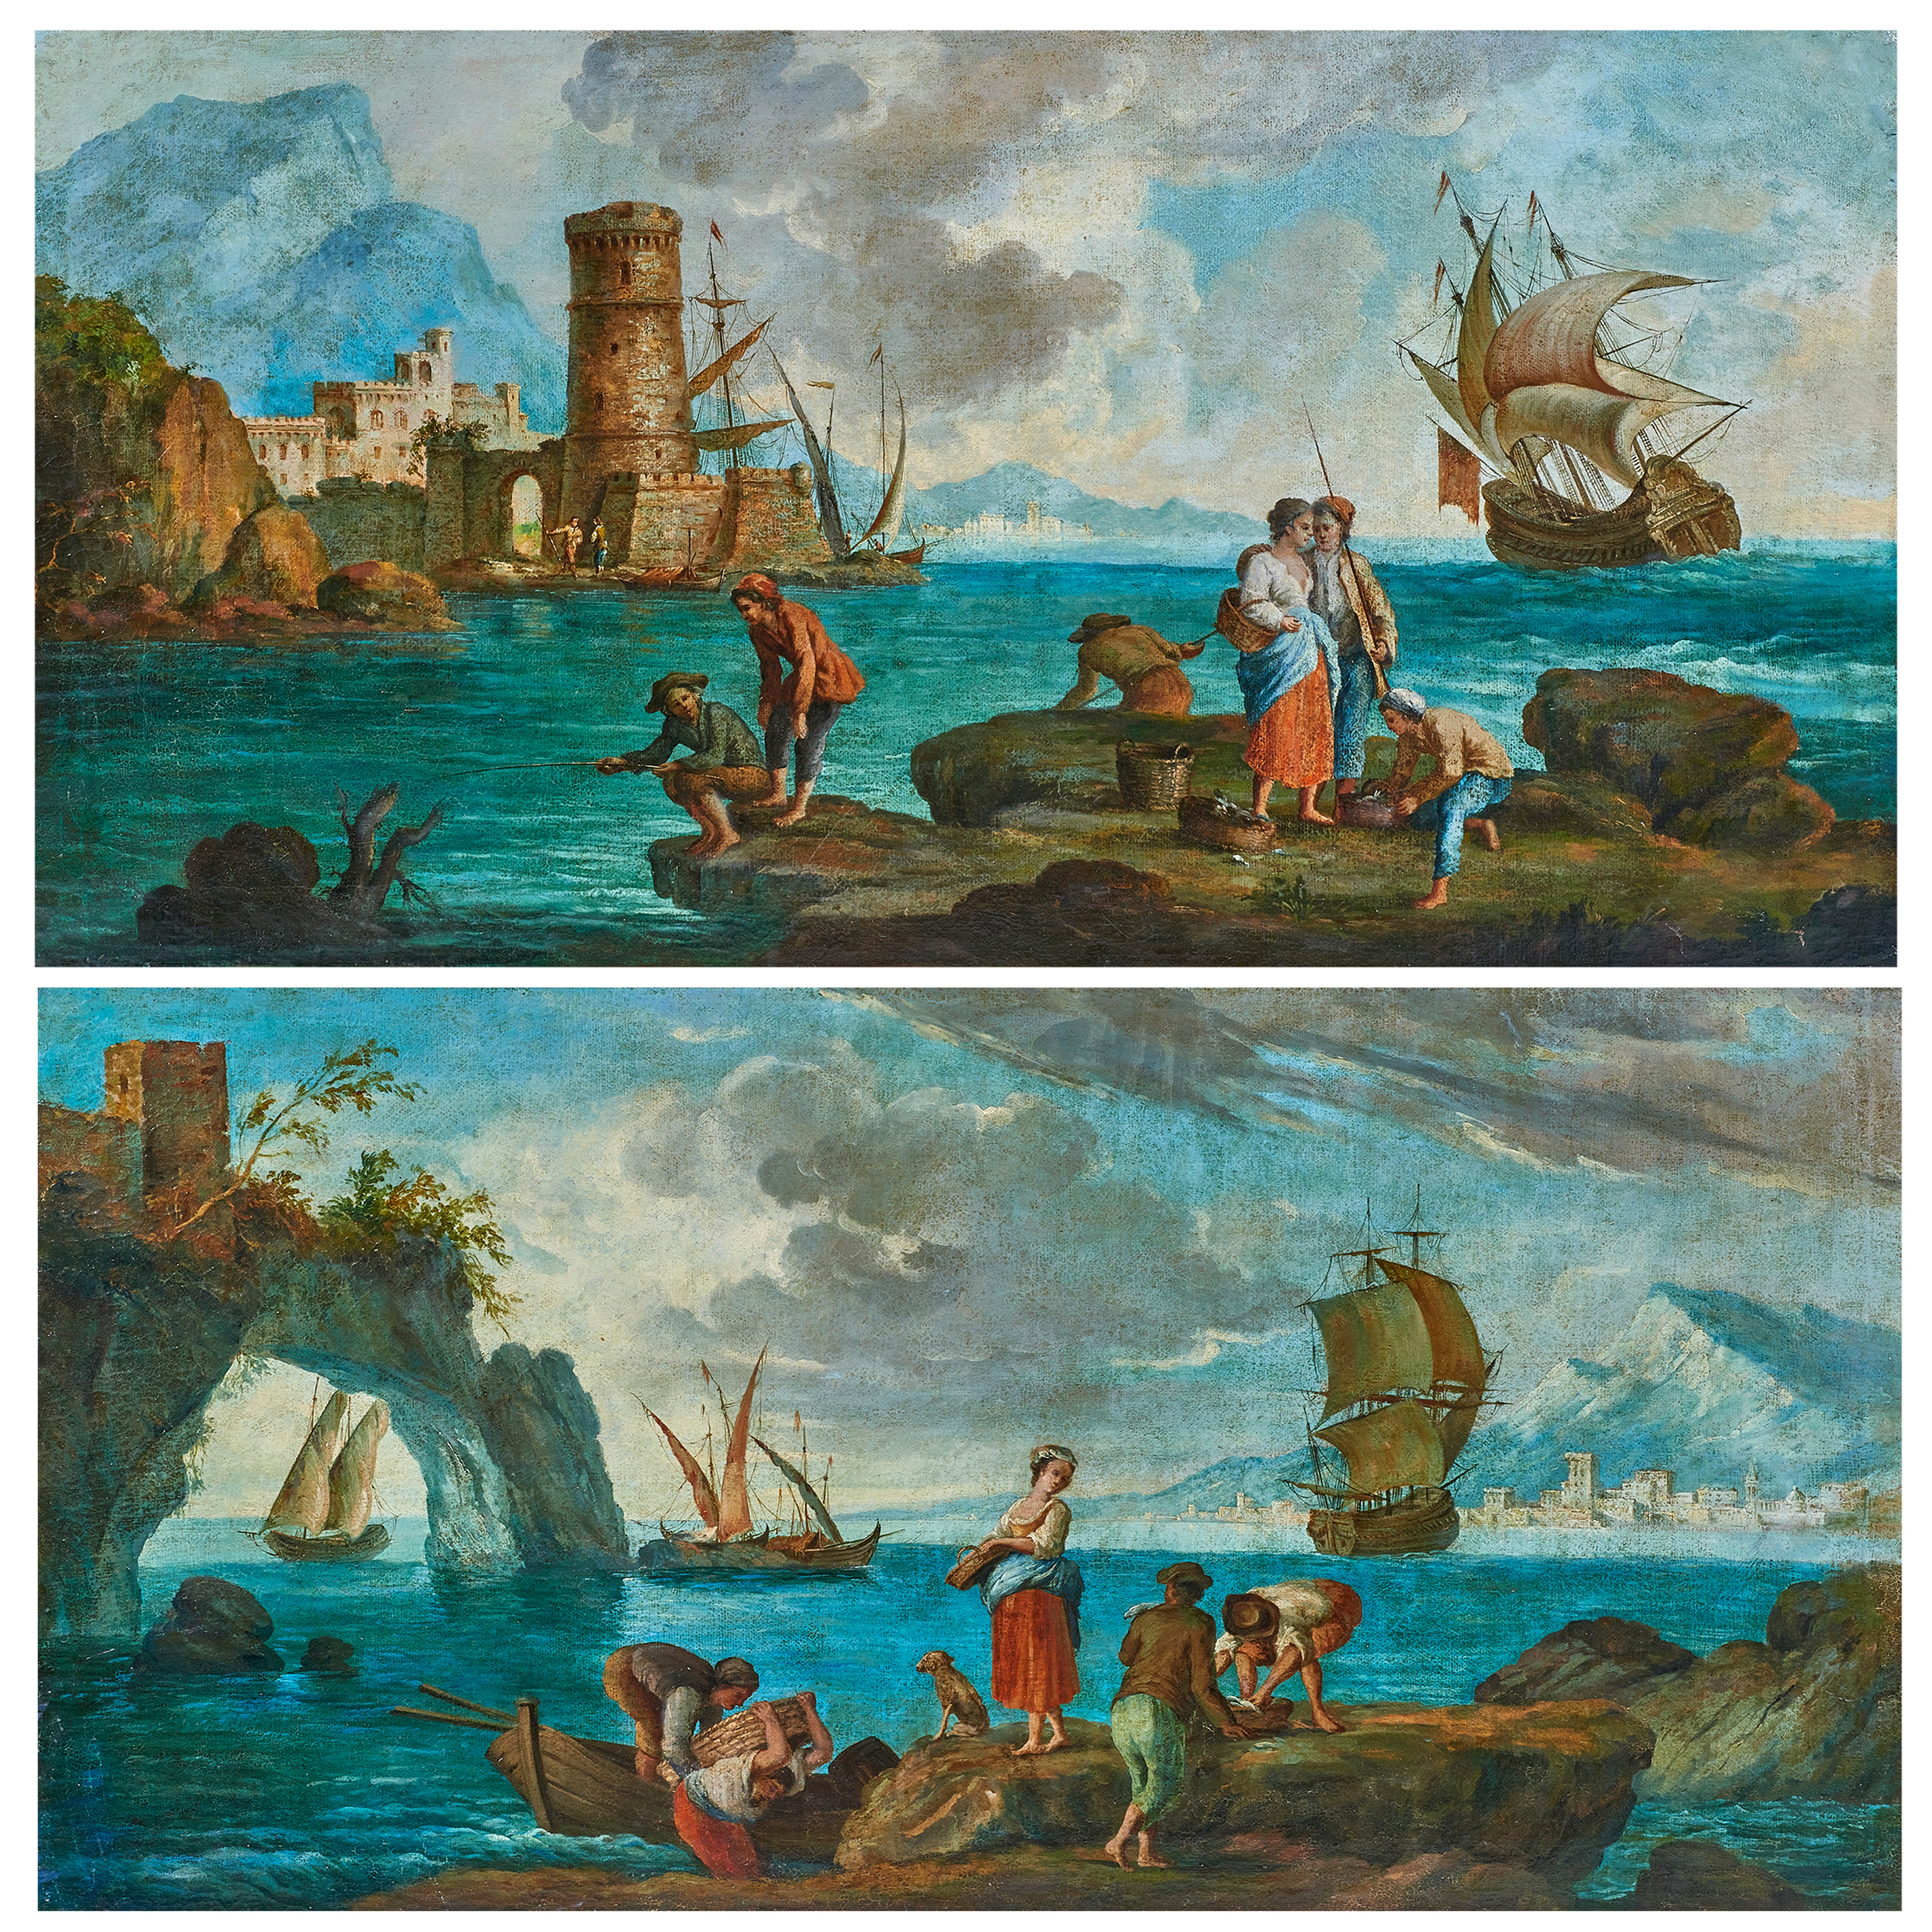 PAINTINGS, VIEWS OF THE BAY OF